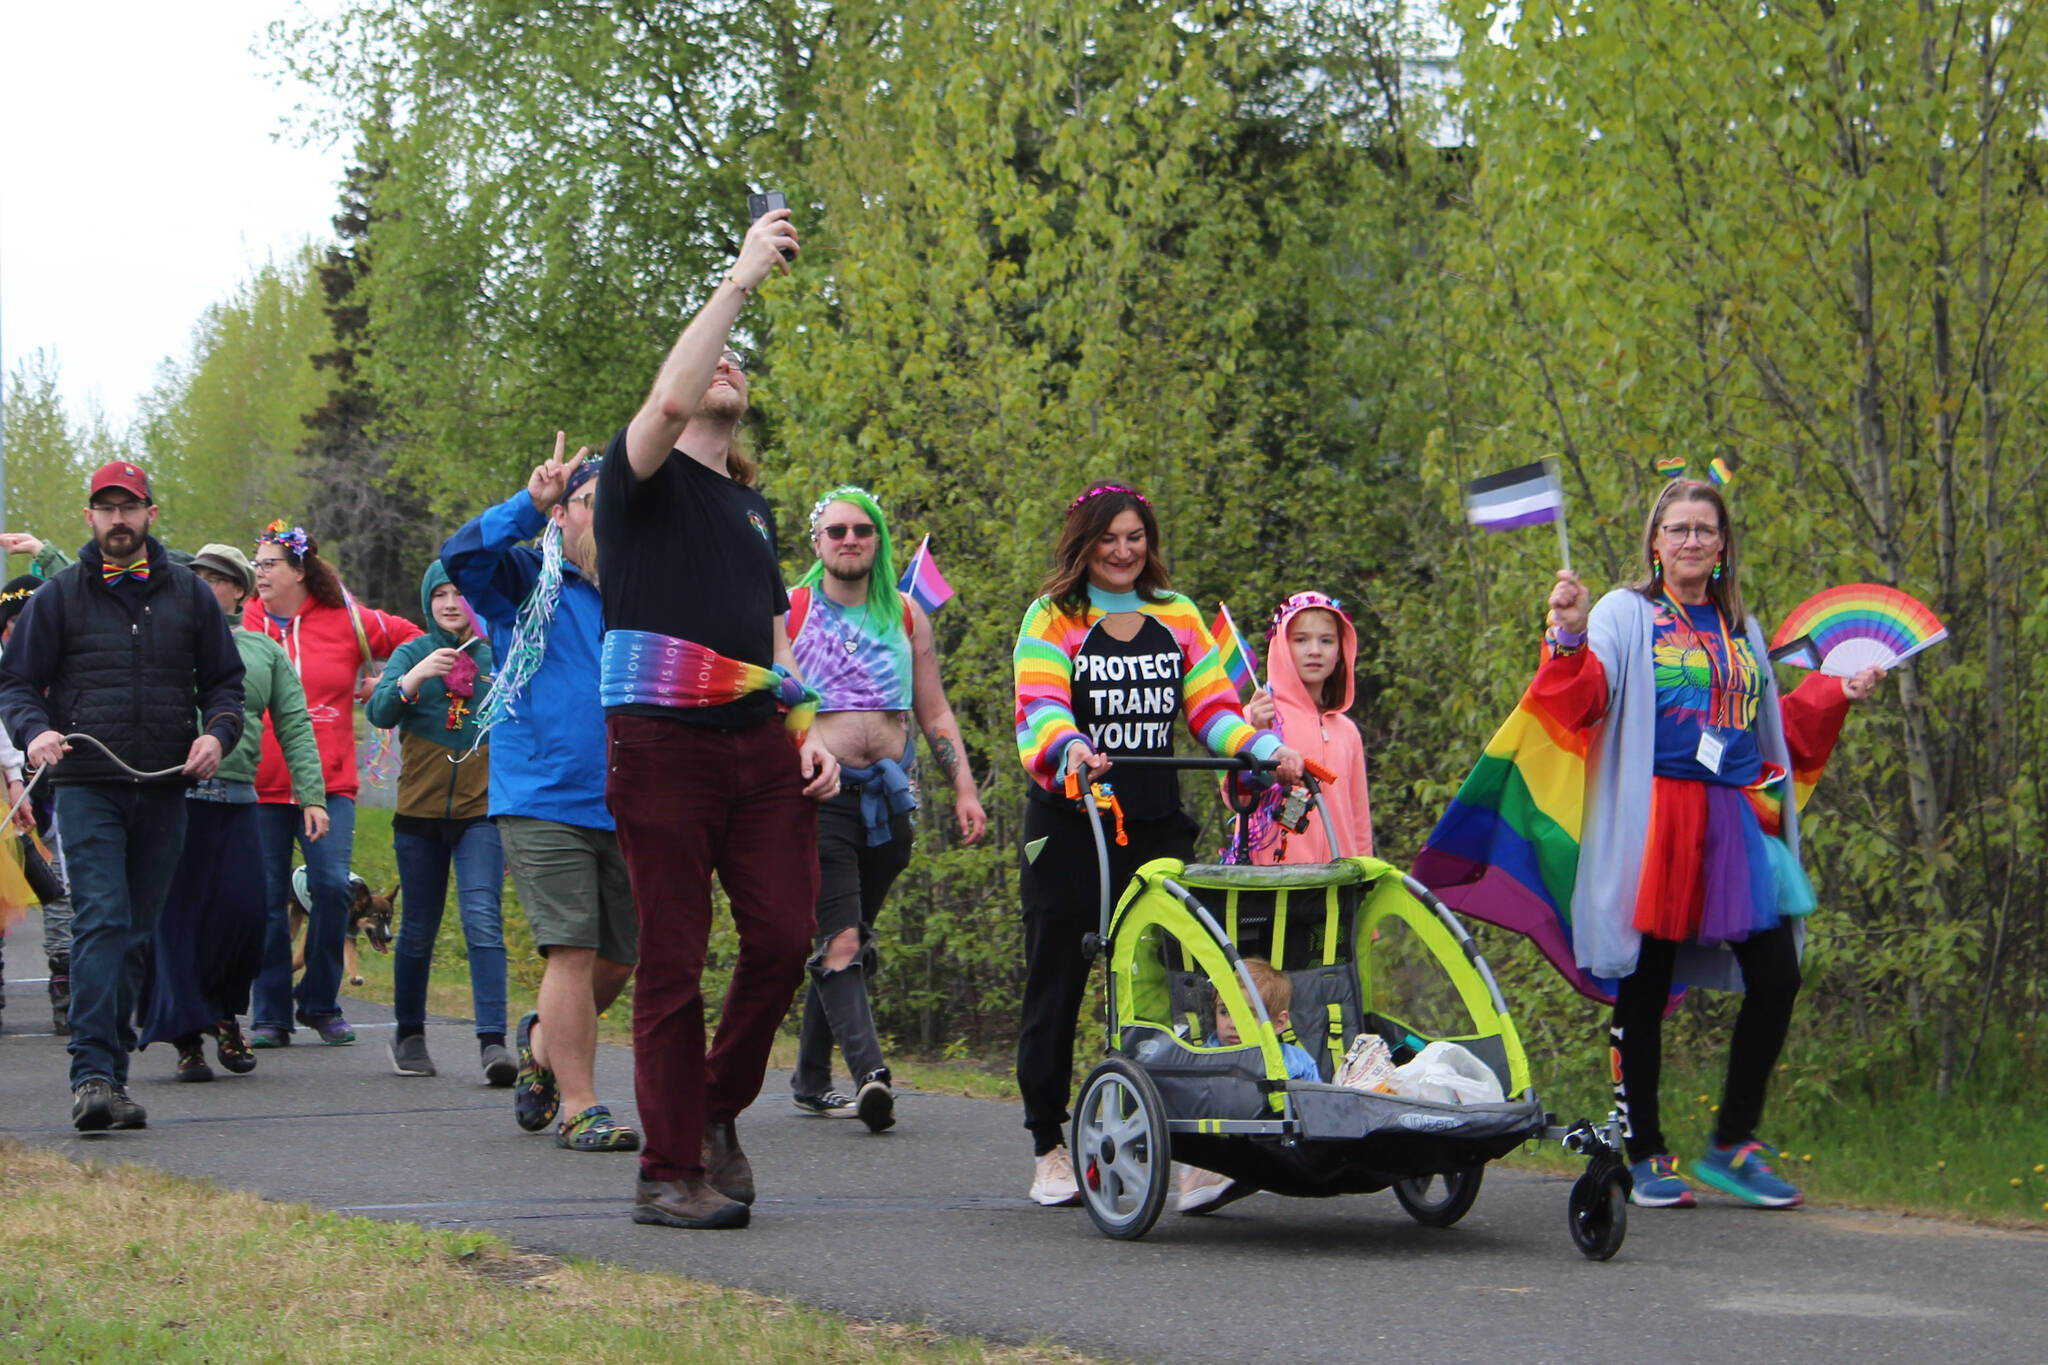 Michele Vasquez (right) helps lead marchers from the Soldotna Regional Sports Complex to Soldotna Creek Park as part of Soldotna Pride in the Park on Saturday, June 3, 2023 in Soldotna, Alaska. (Ashlyn O’Hara/Peninsula Clarion)